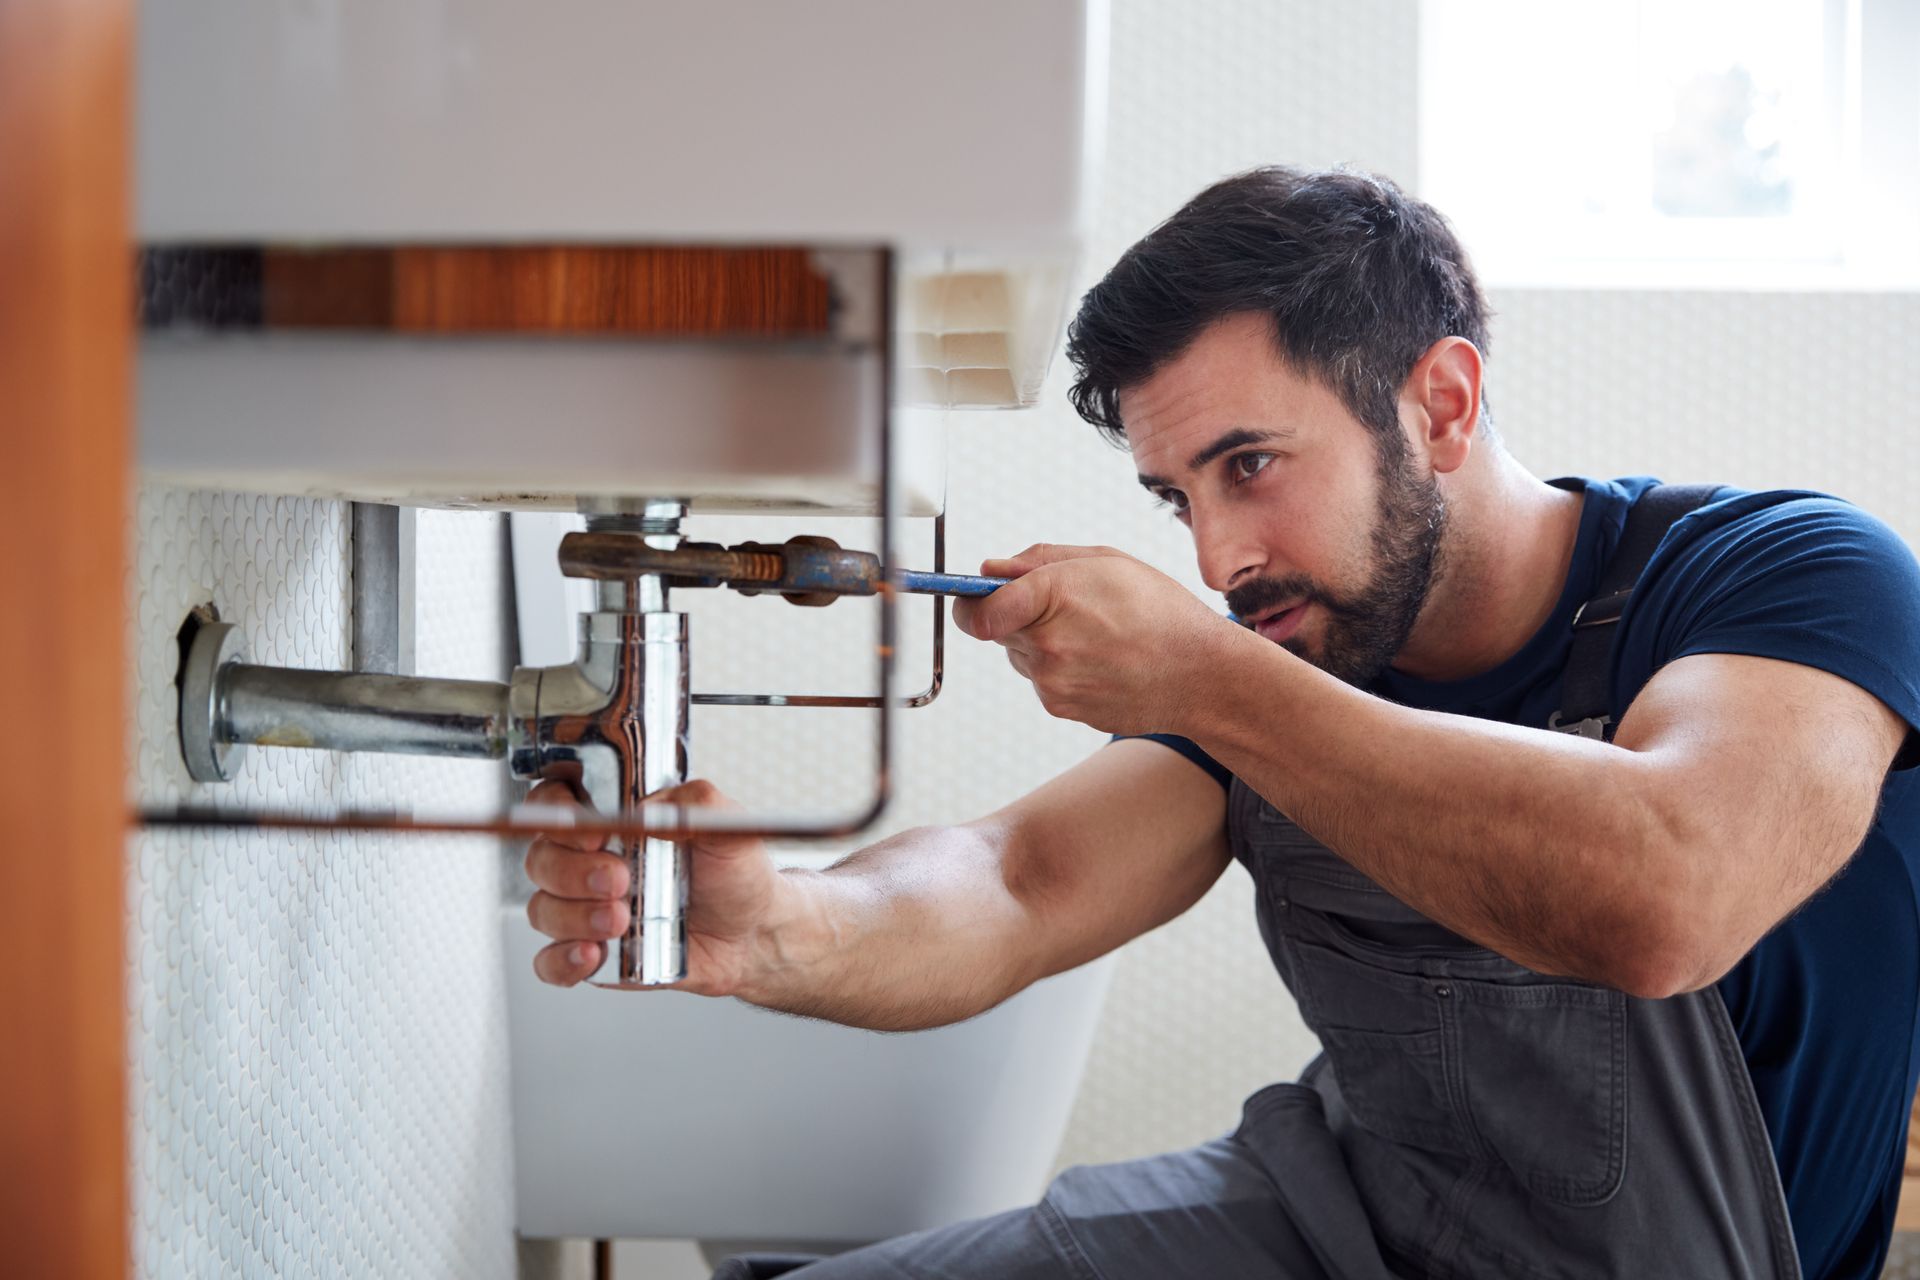 Male plumber wearing a blue uniform and gloves, using a wrench to repair a leaking sink in a home bathroom.